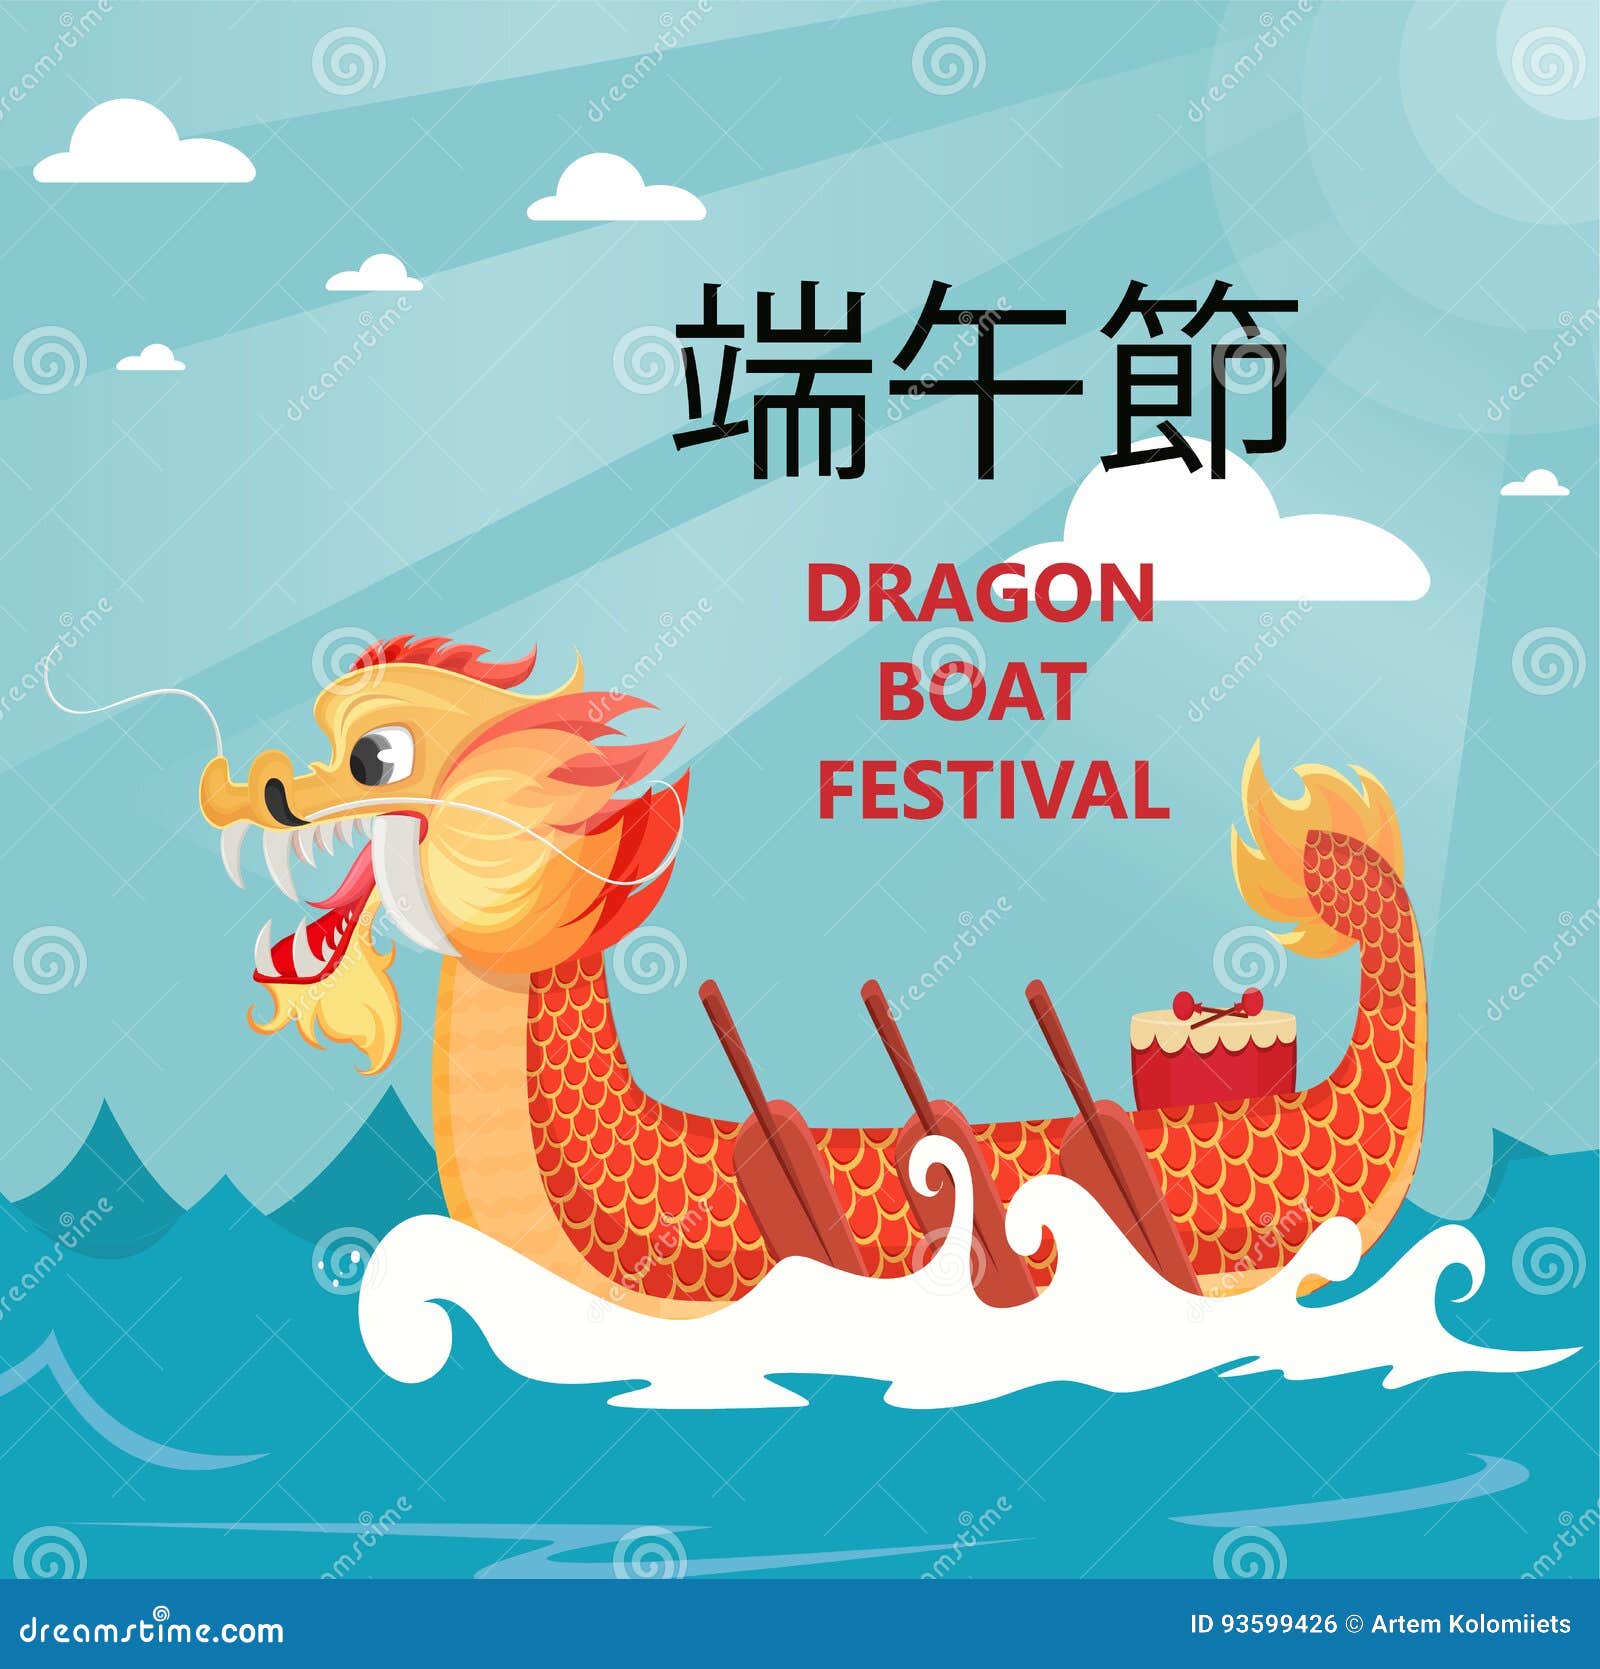 dragon boat festival greeting card or poster. text translates as dragon boat festival.